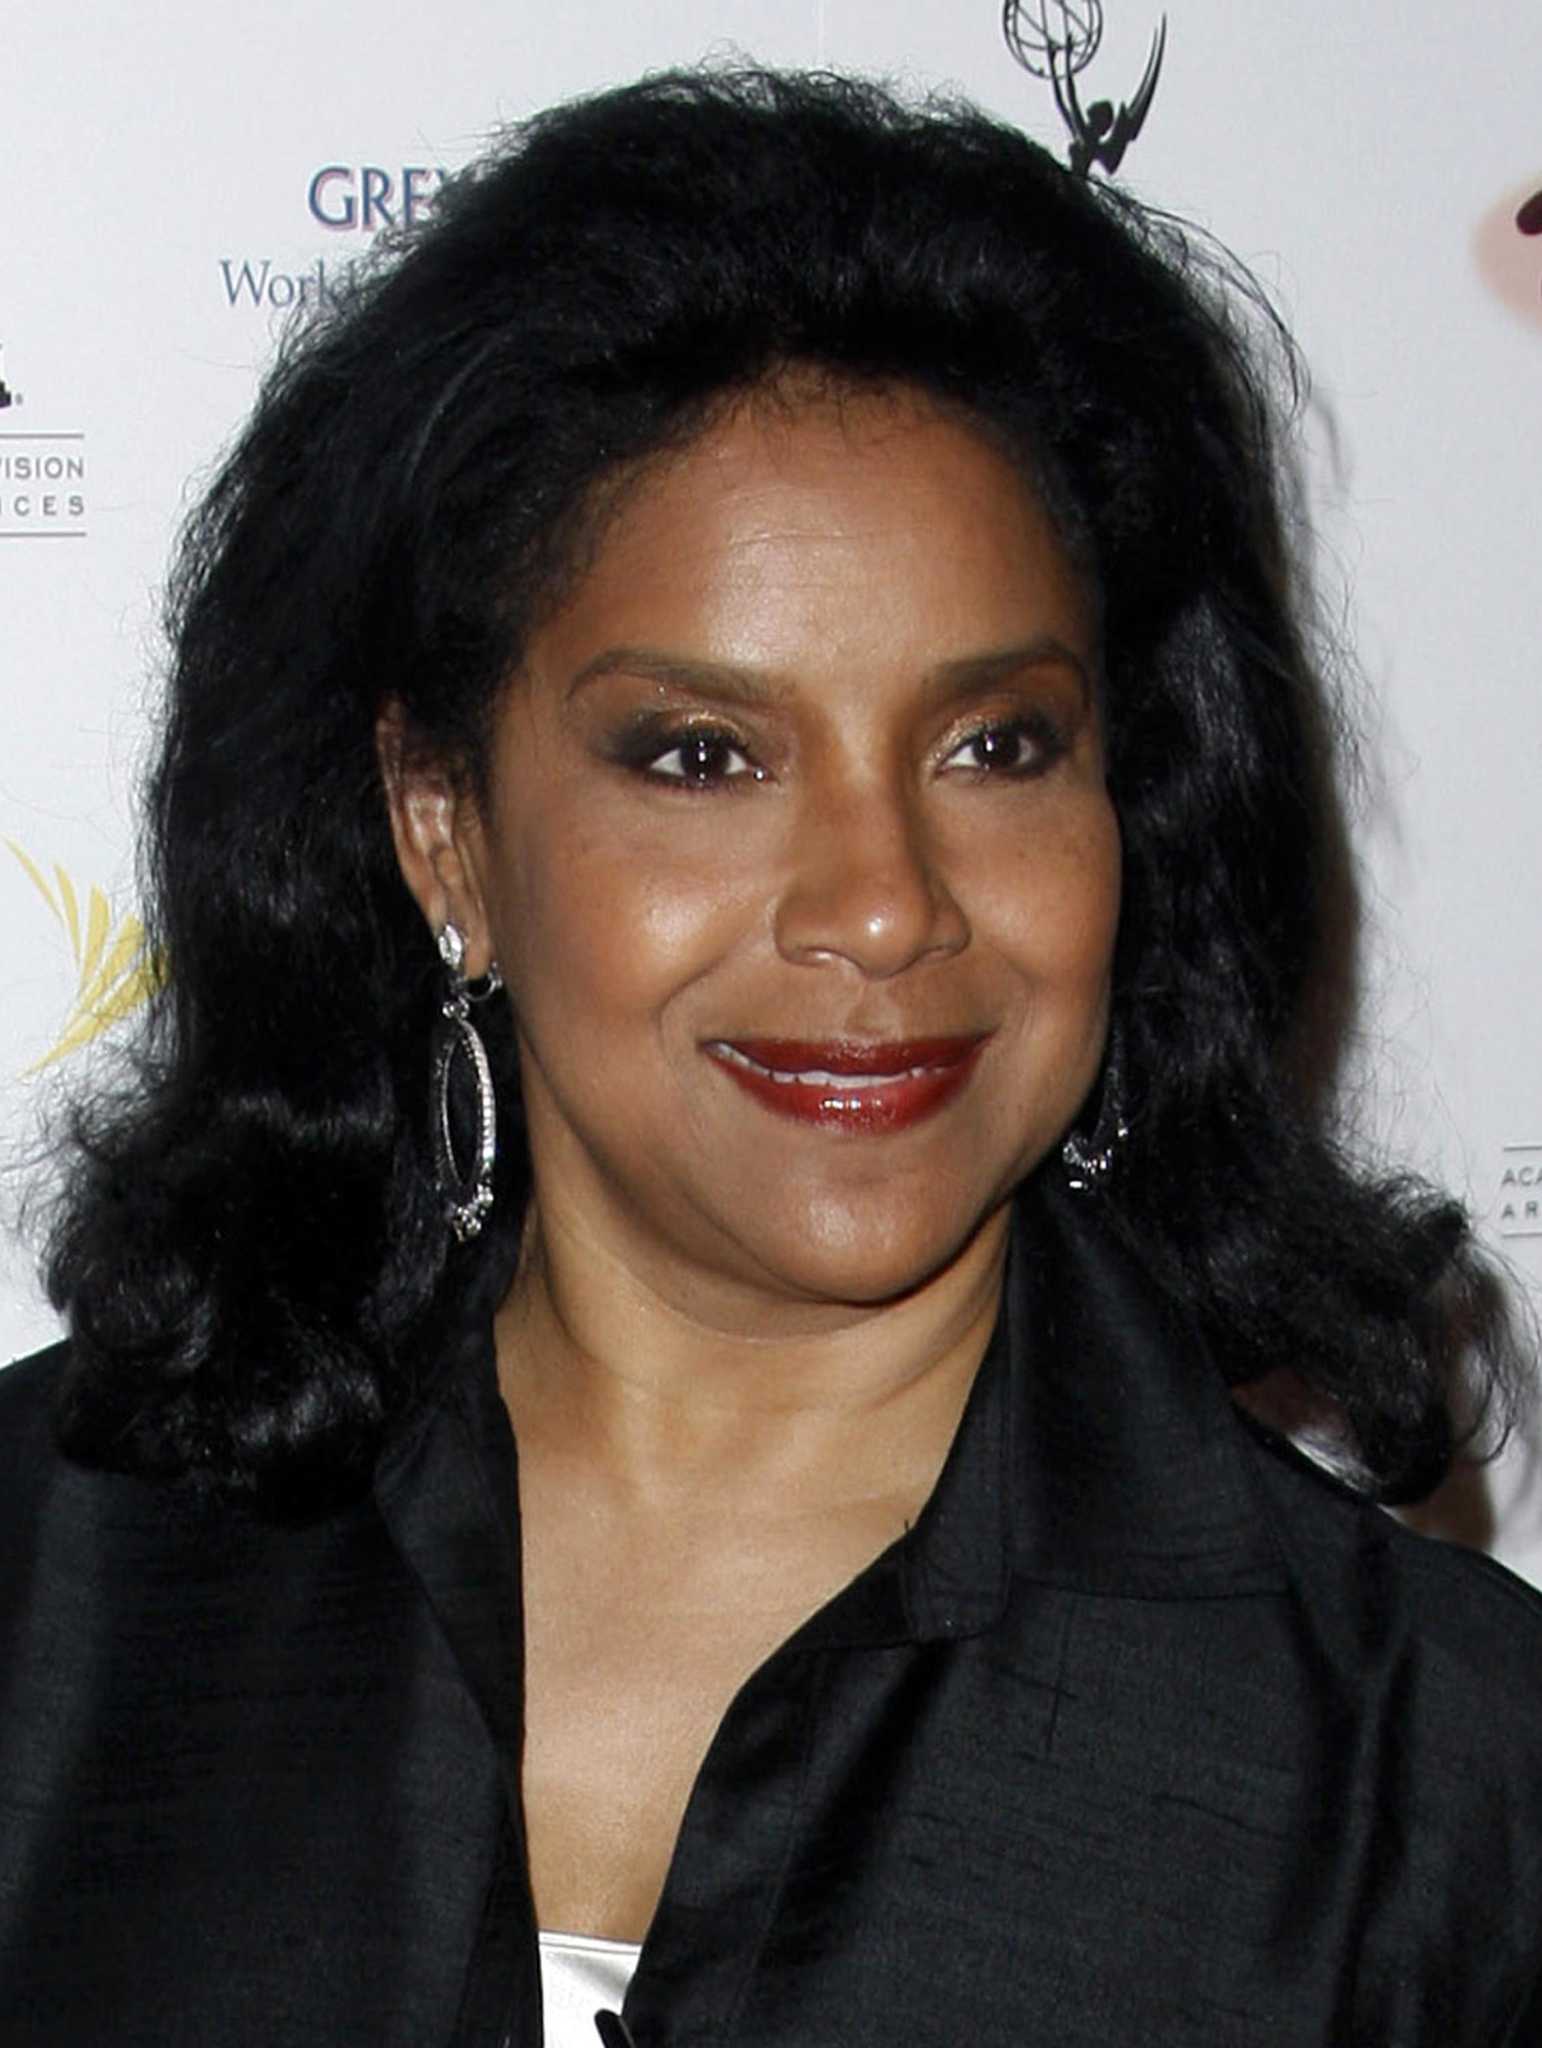 Phylicia Rashad comfortable in role as America's mom ...